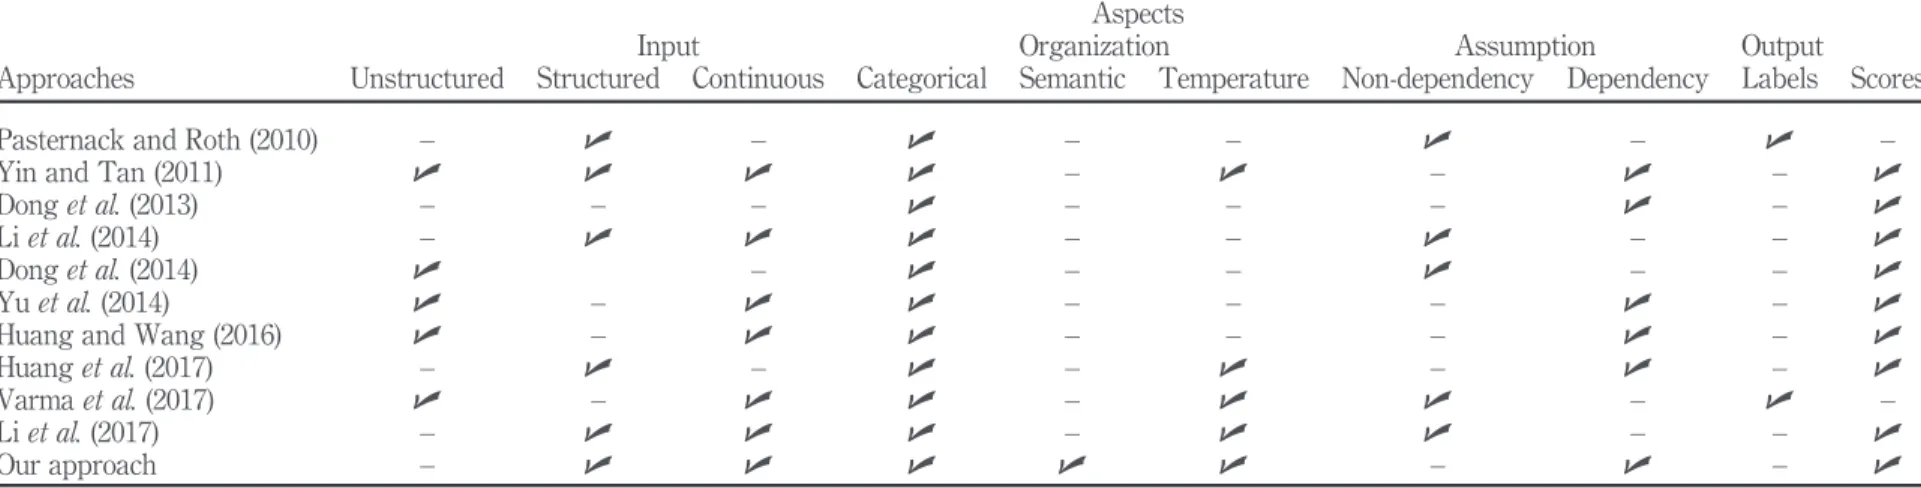 Table I.Comparativestudyofsourcereliabilityapproaches